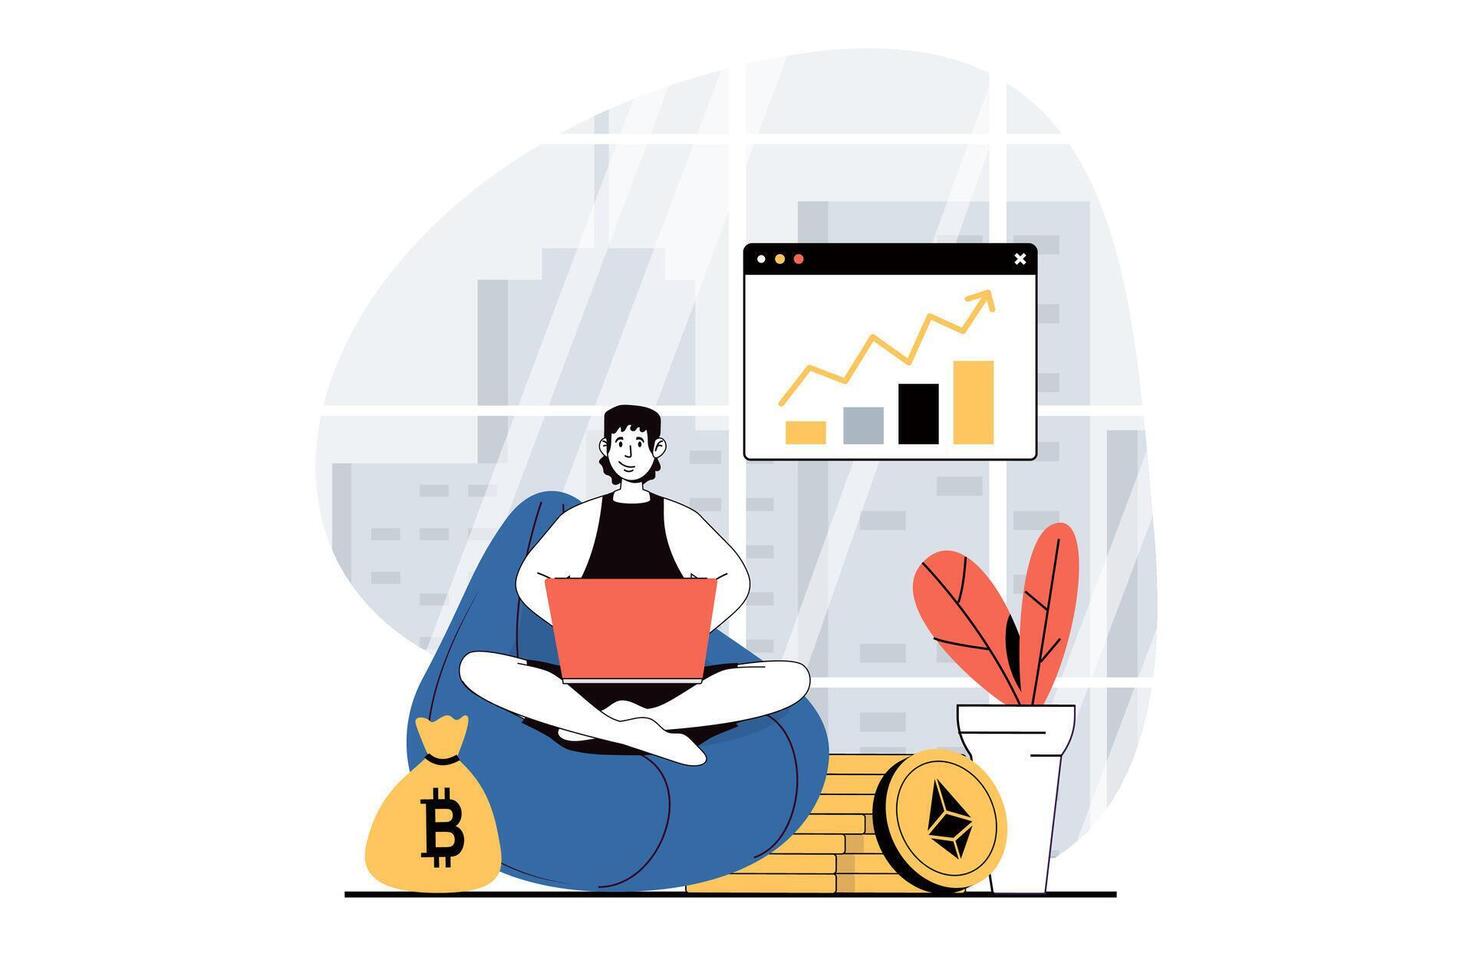 Cryptocurrency mining concept with people scene in flat design for web. Man analysing crypto market, investing money in mining farm. Vector illustration for social media banner, marketing material.